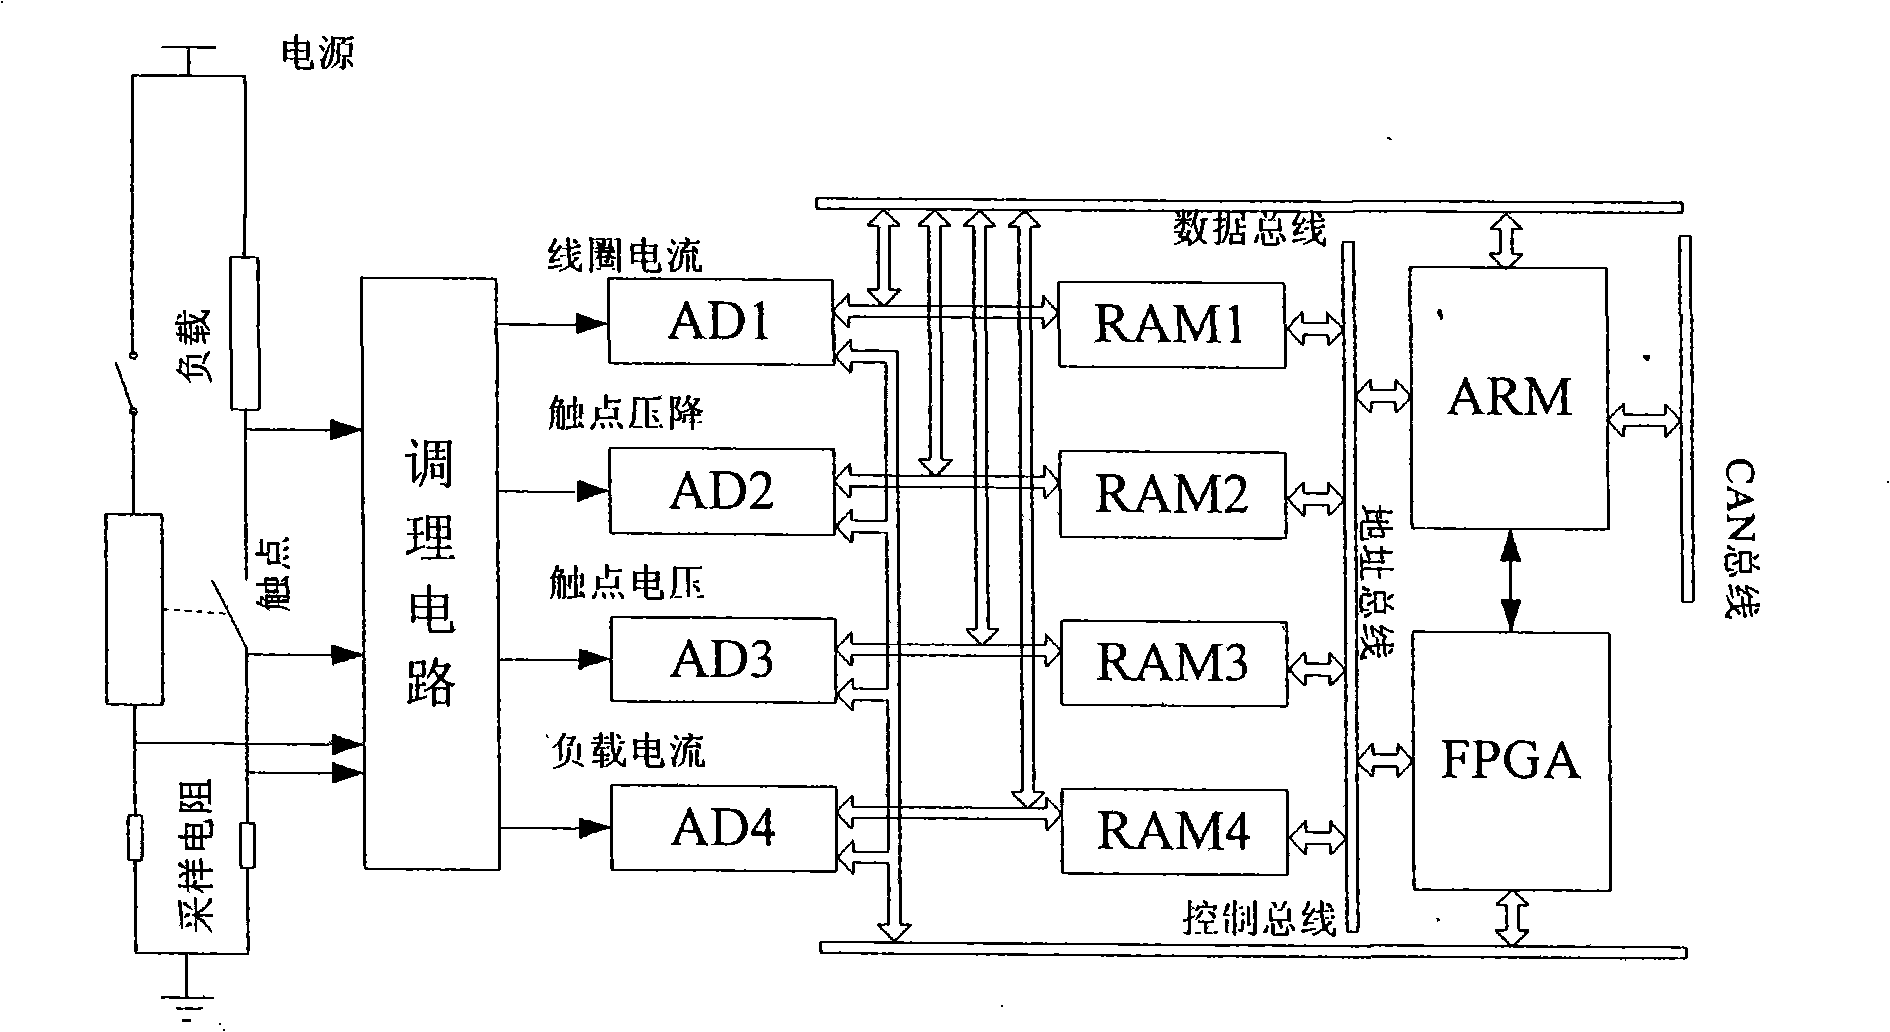 Relay reliability service life experiment system based on dynamic characteristic